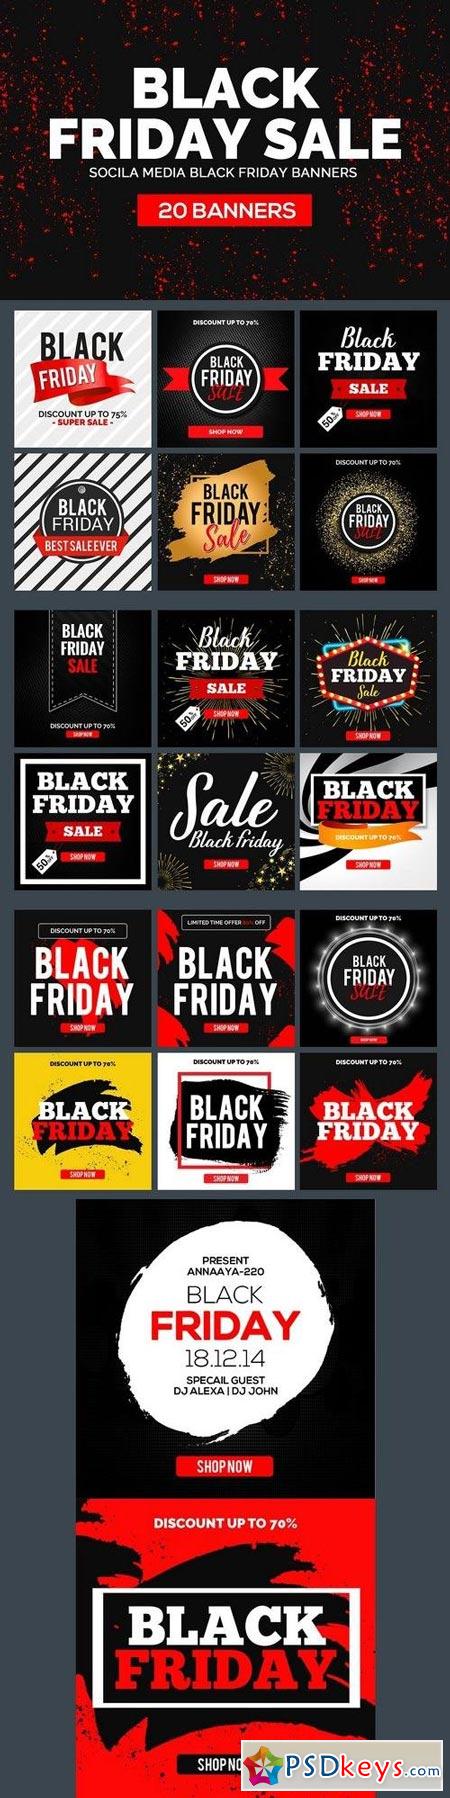 20 Black Friday Banners 1073259